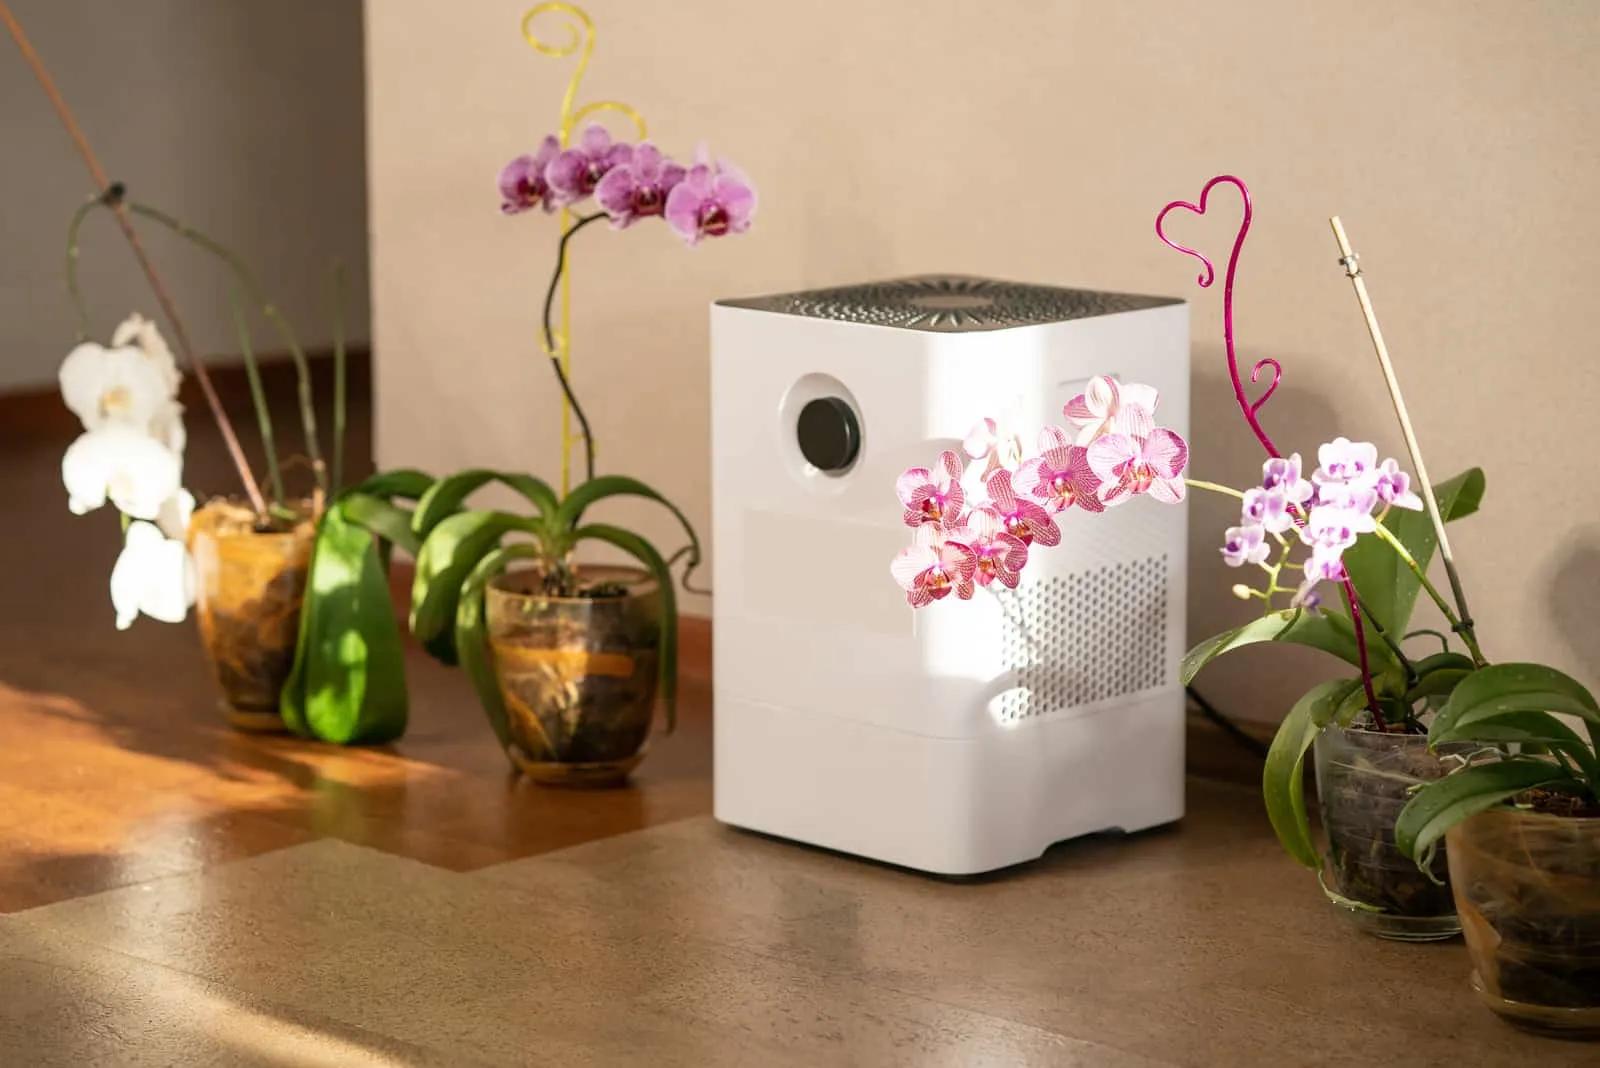 Air humidifier near the orchid flowers at home